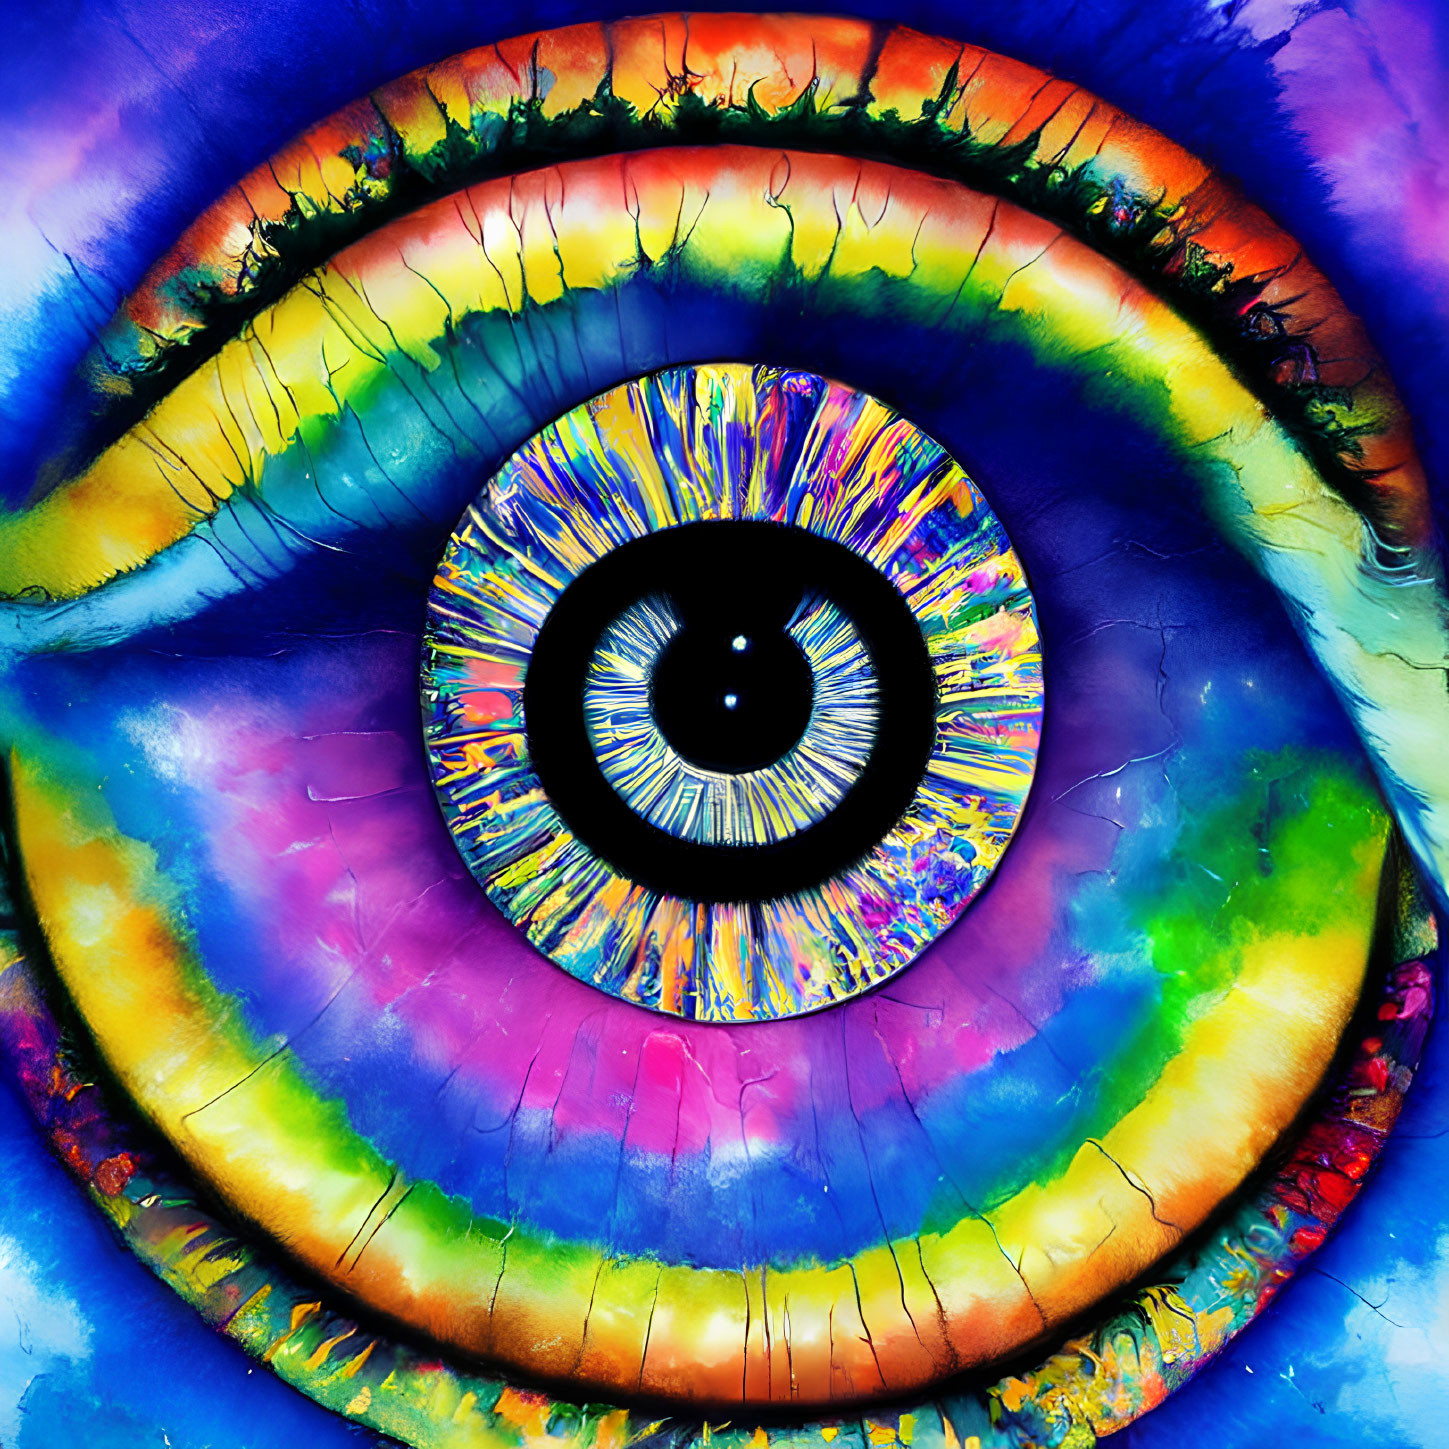 Colorful Close-Up of Eye with Rainbow Hues and Starburst Iris Pattern